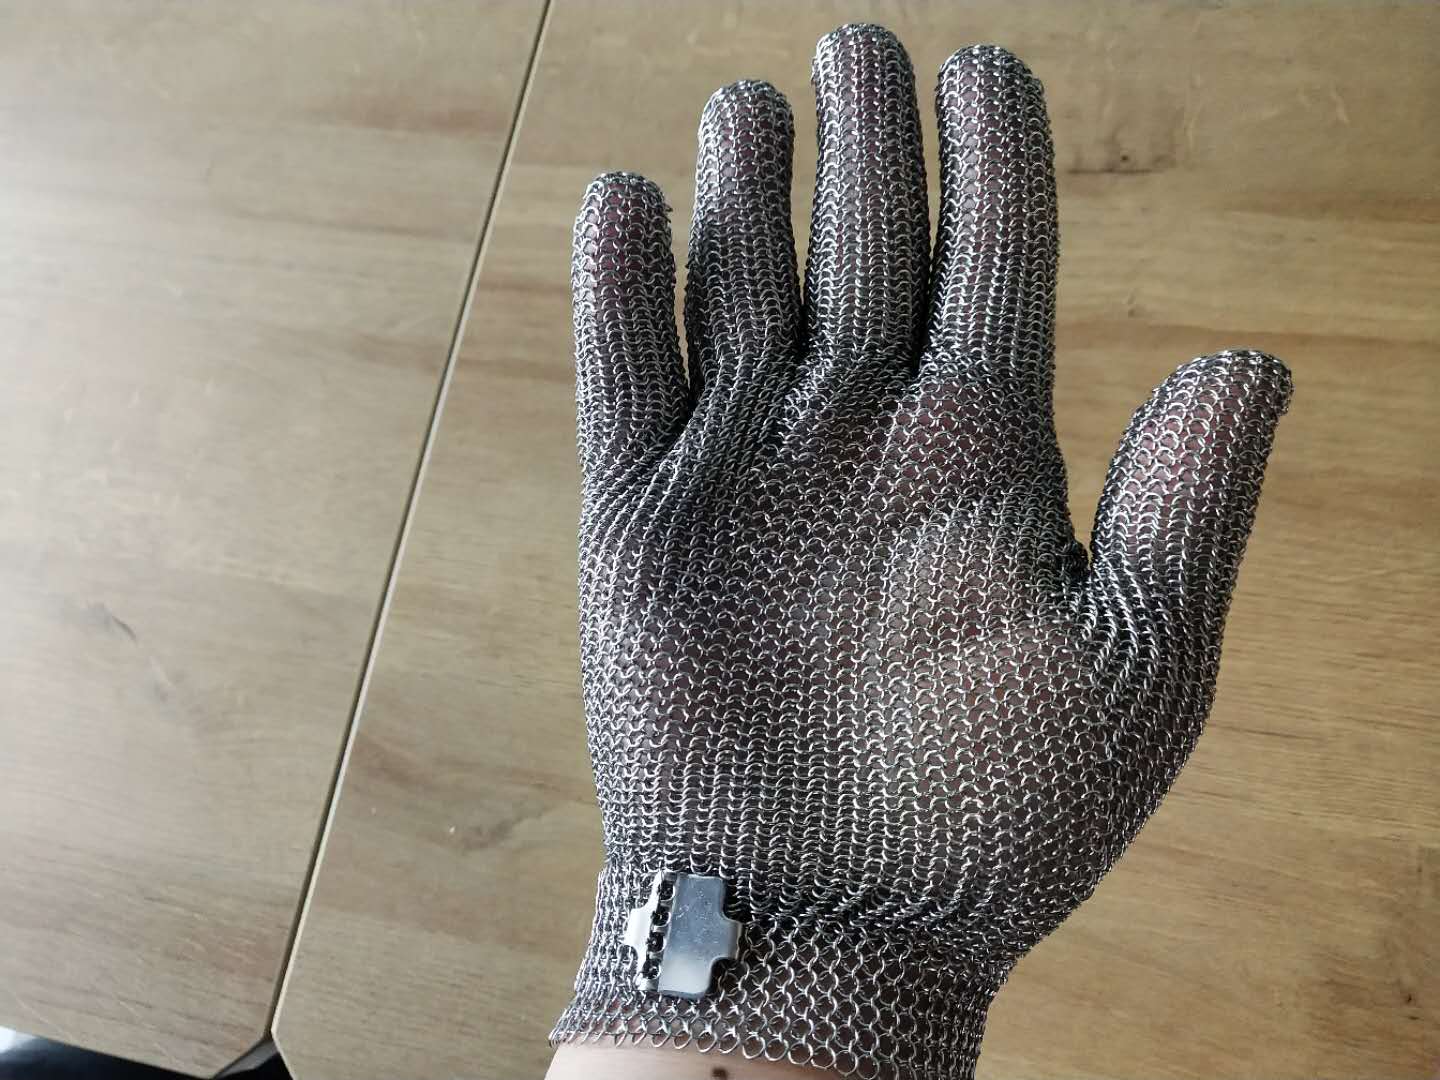 butcher protection stainless steel wire mesh gloves